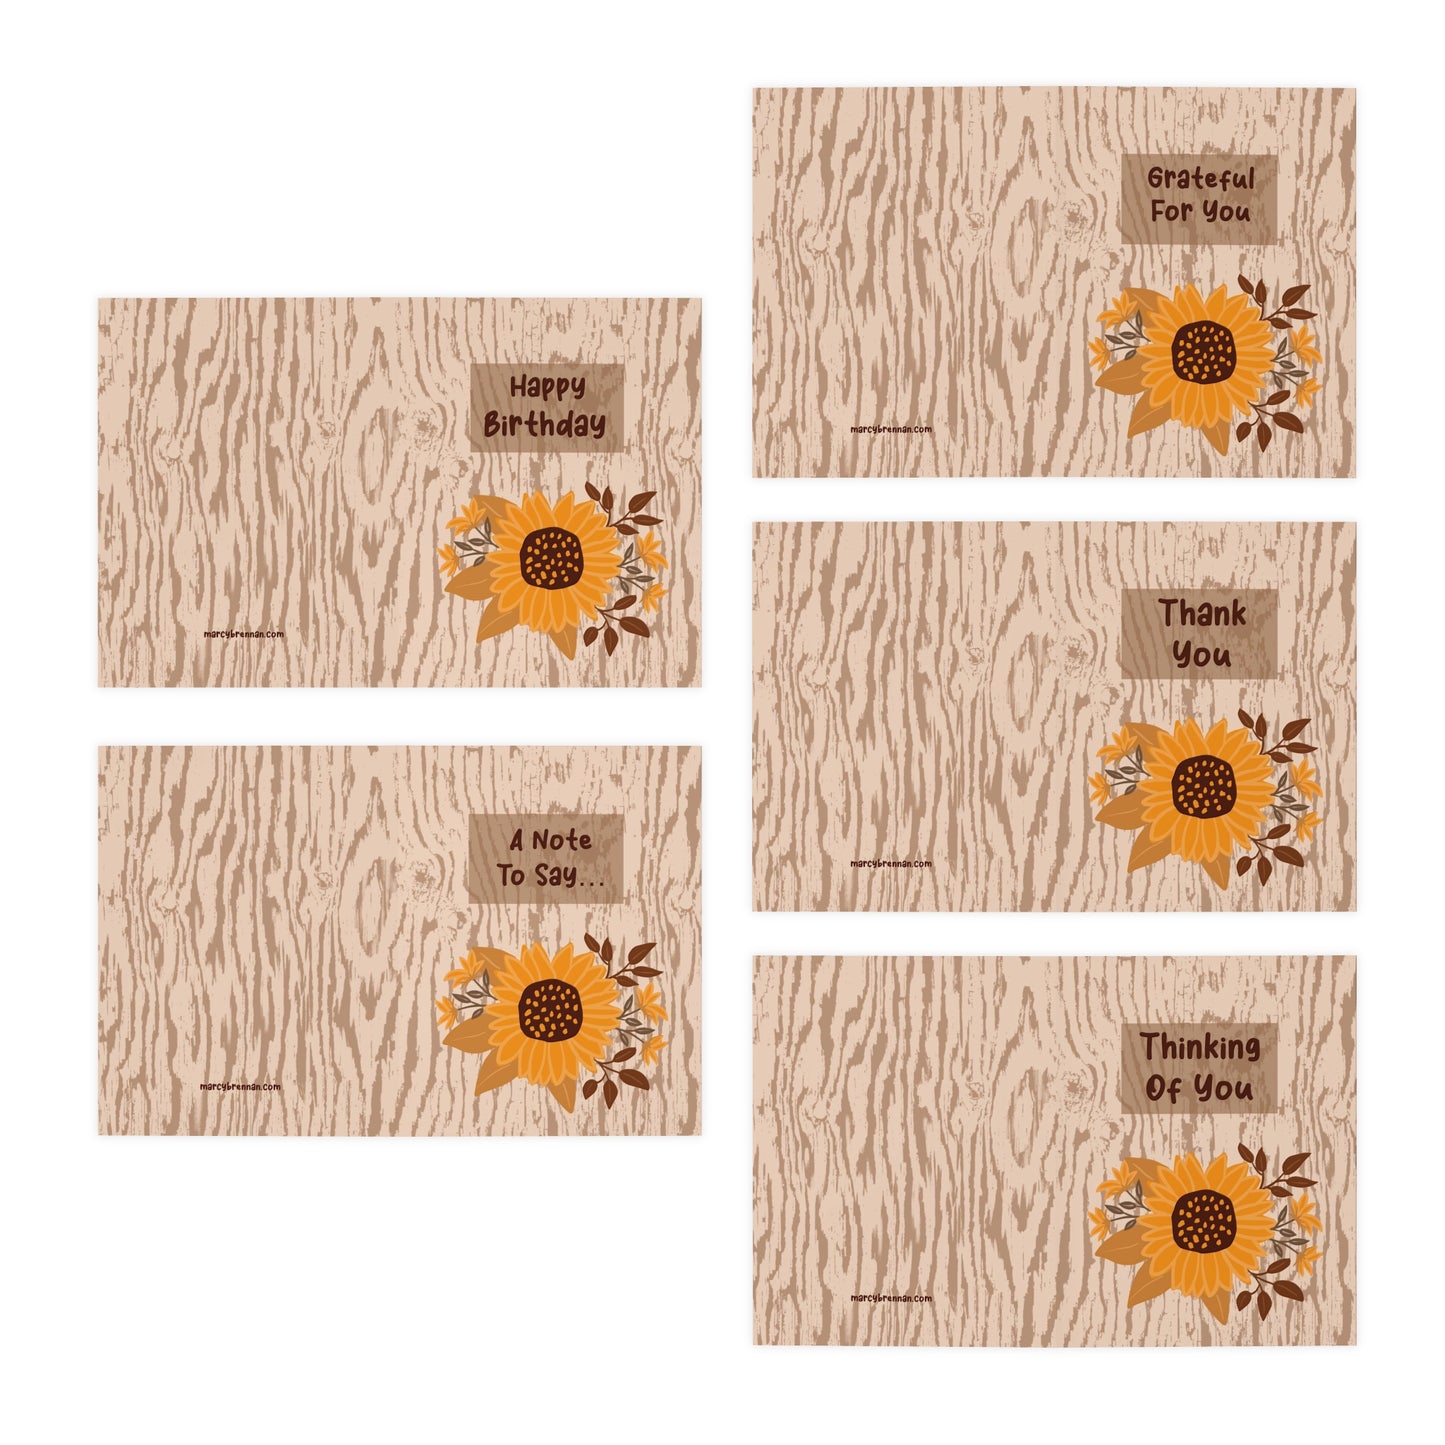 Sunflower Multi-Occasion Multi-Design Greeting Cards (5-Pack) - FREE SHIPPING